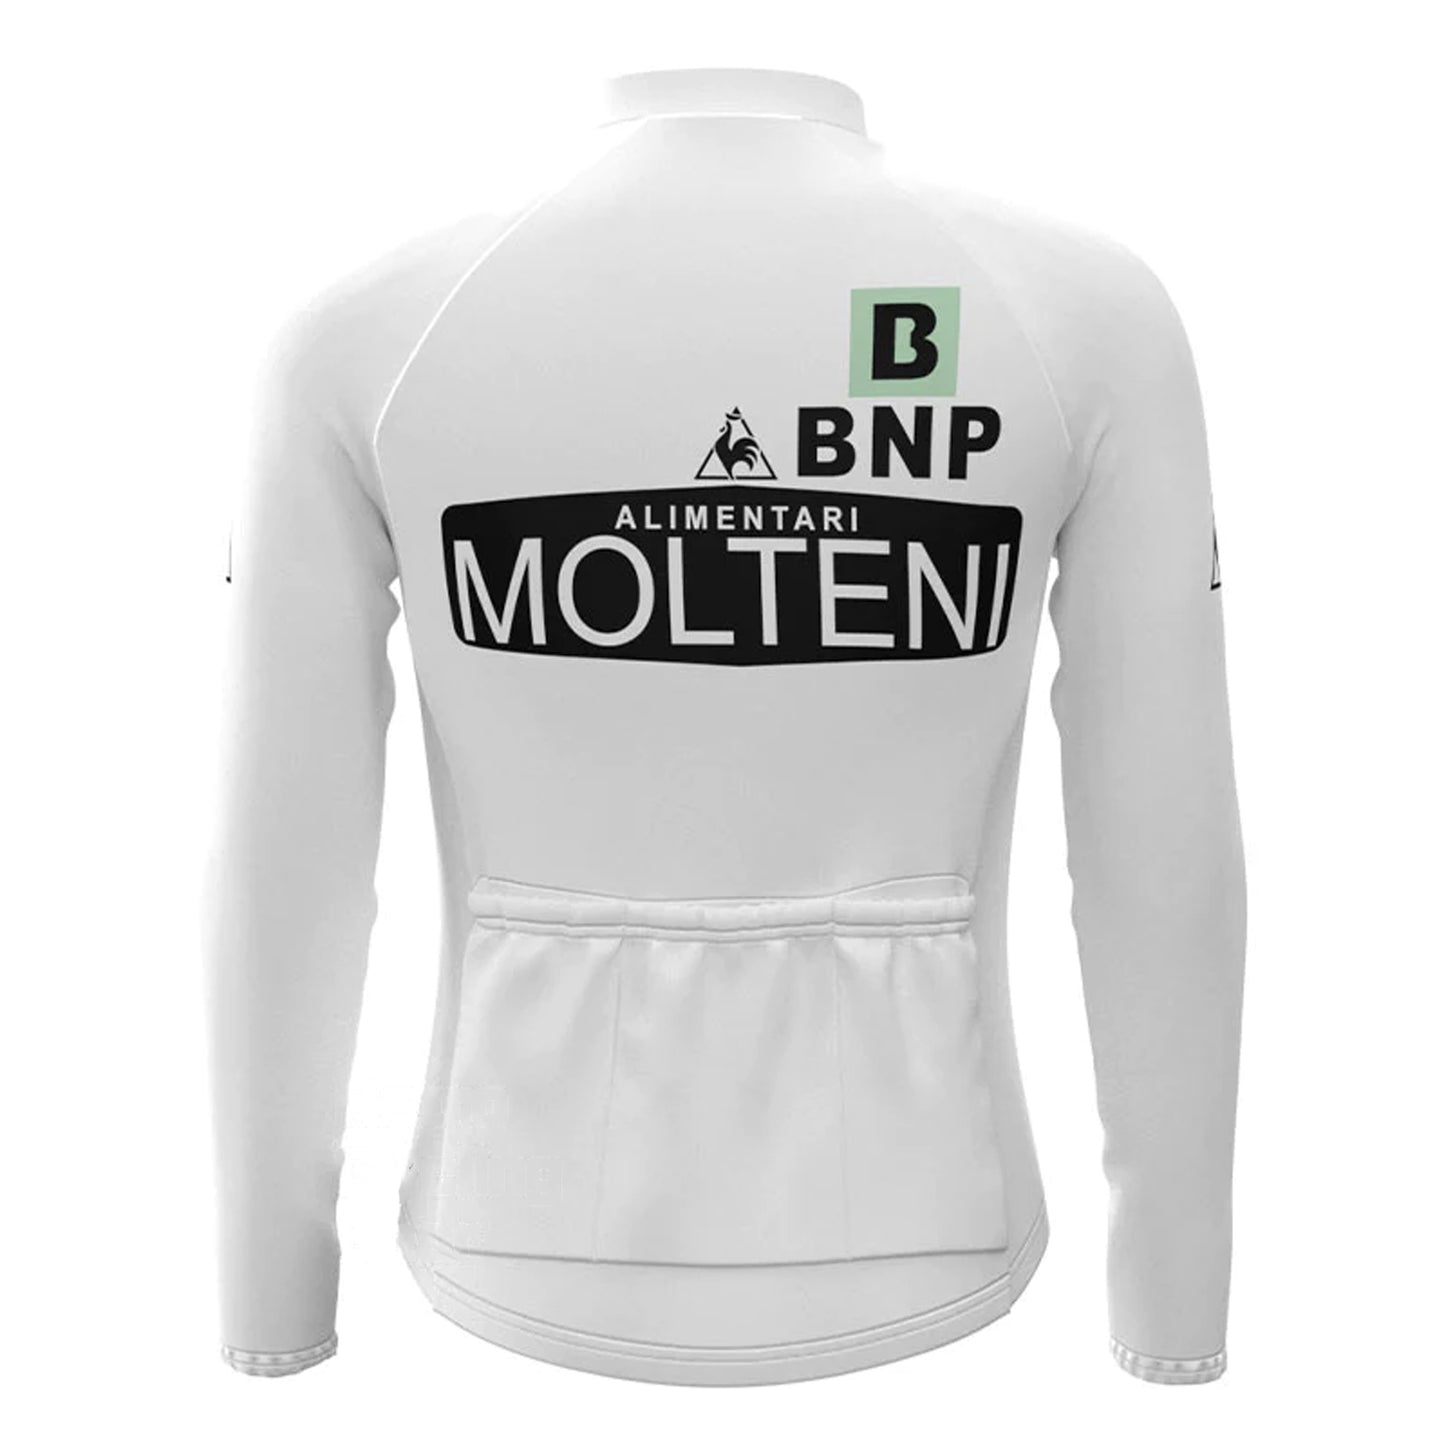 Molteni White Vintage Long Sleeve Cycling Jersey Top